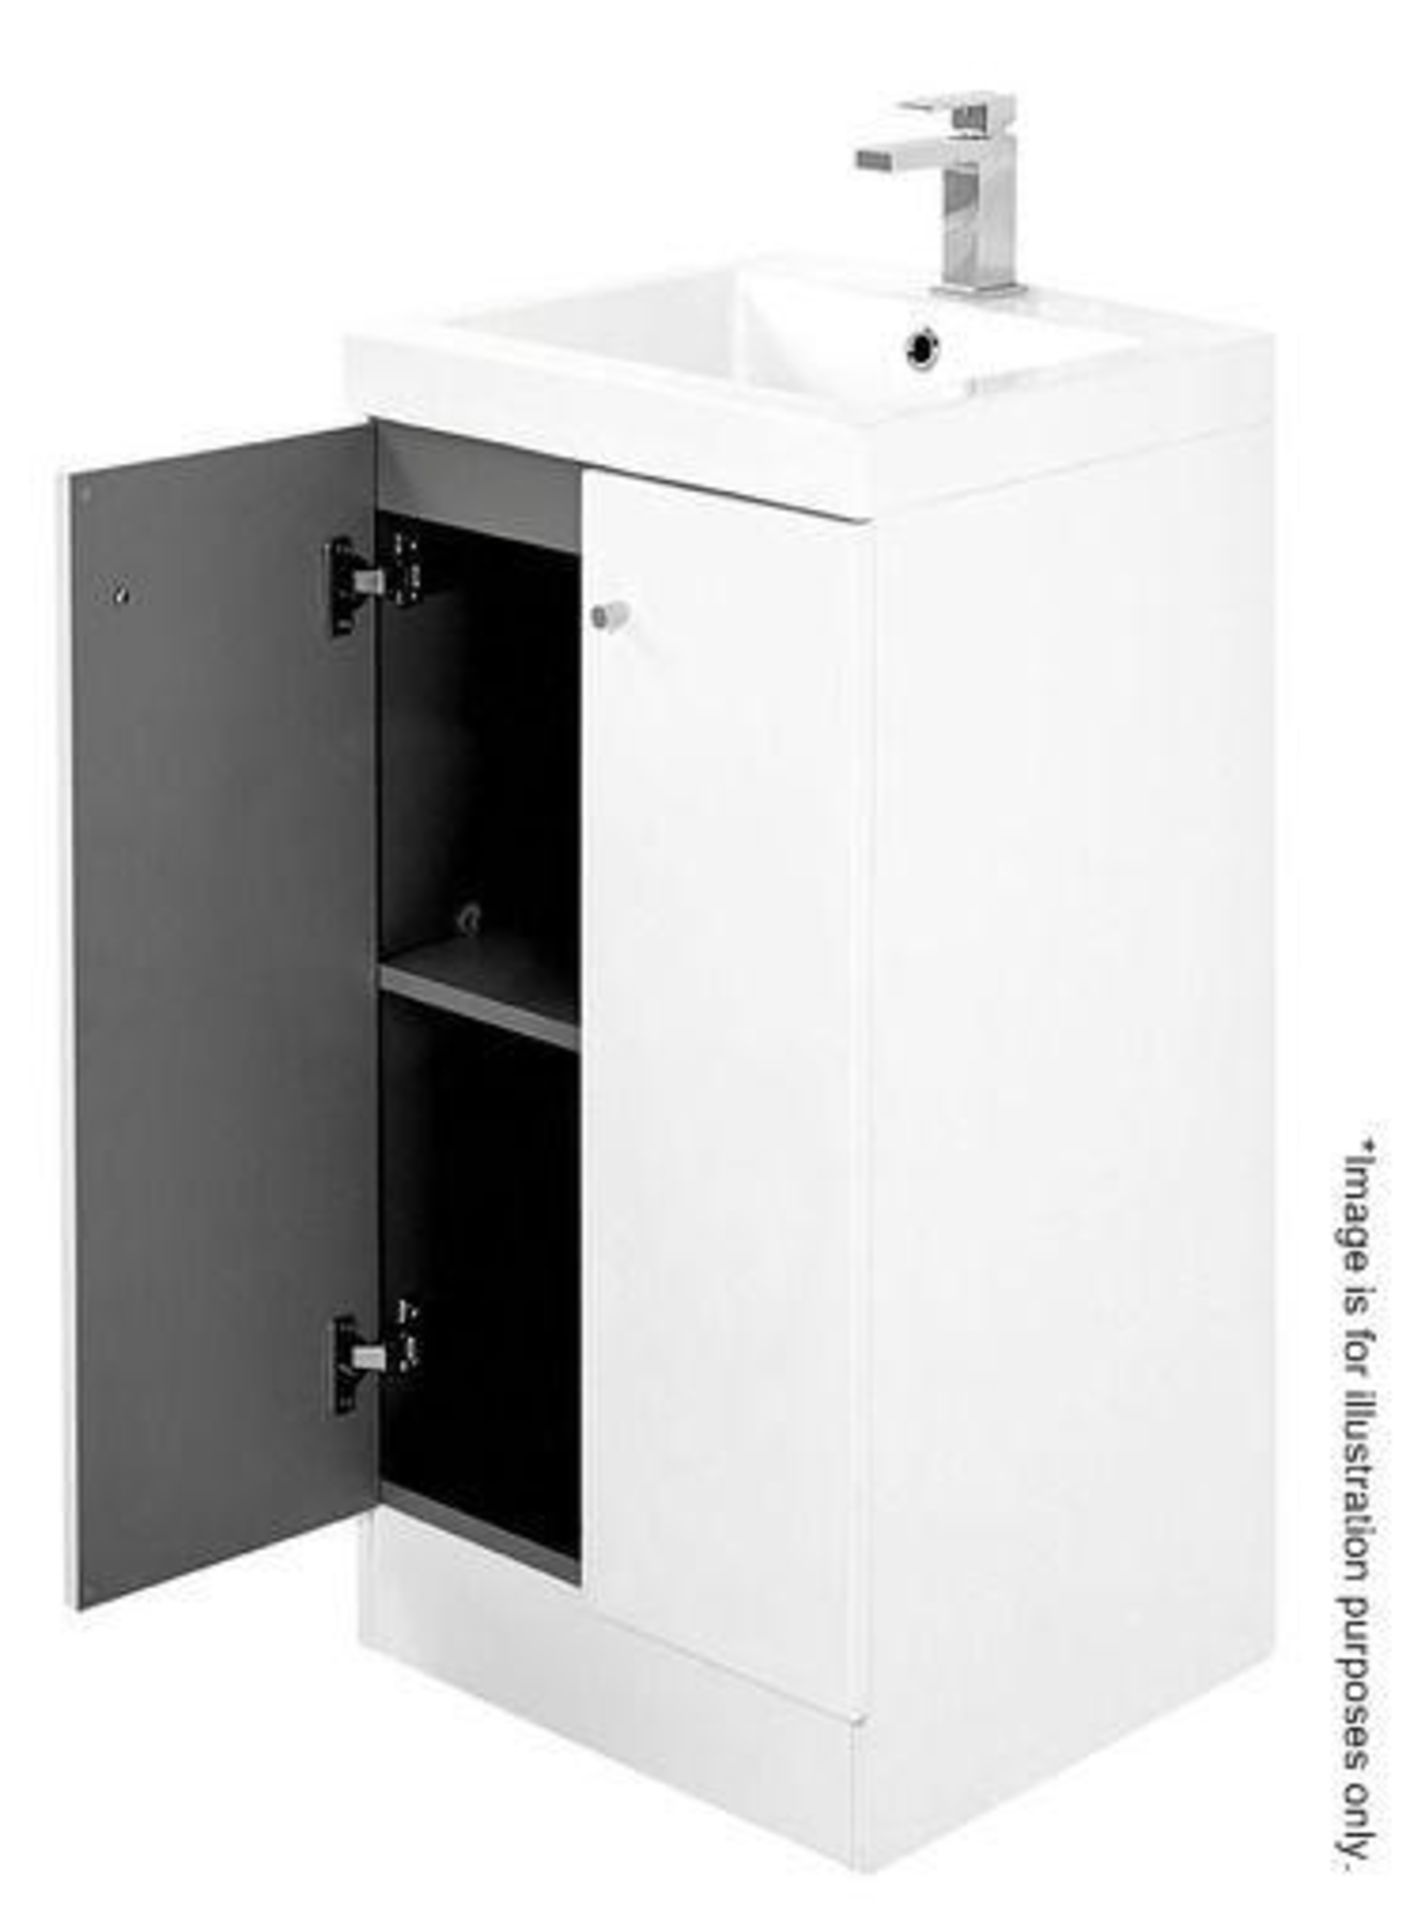 5 x Alpine Duo 400 Floorstanding Vanity Units In Gloss White - Brand New Boxed Stock - Dimensions: H